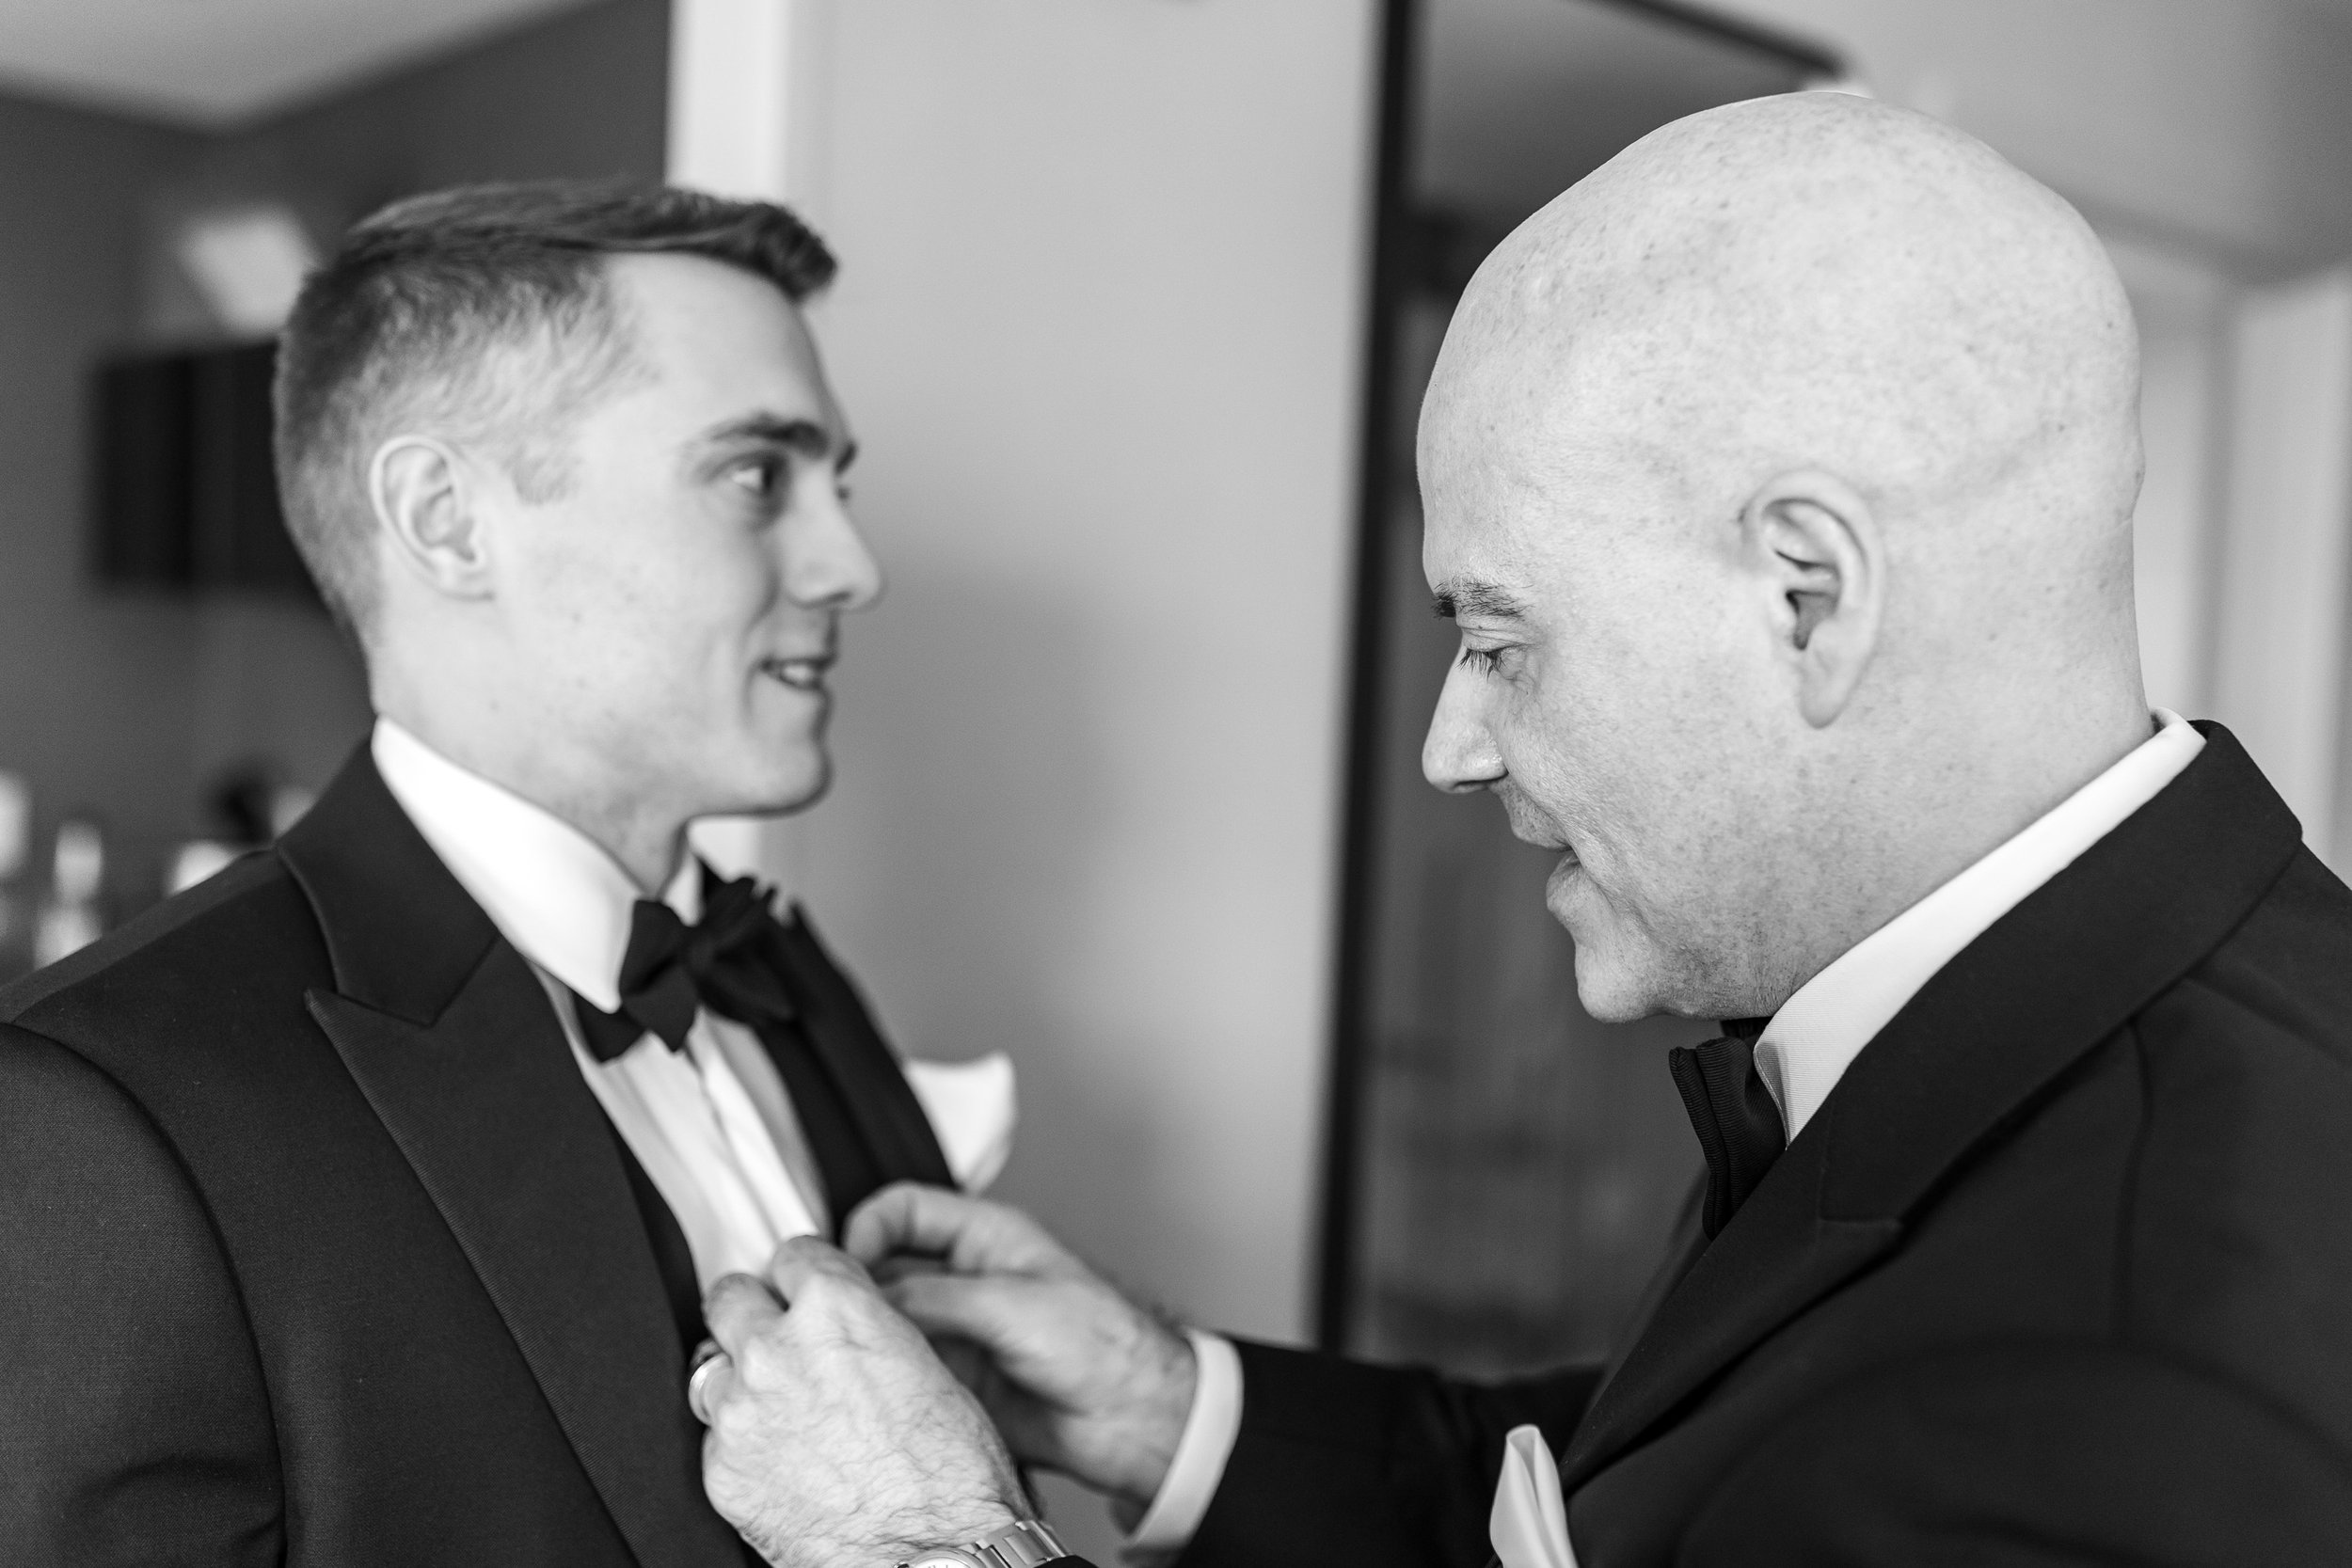 Candid fun photography of bride's father buttoning up the groom